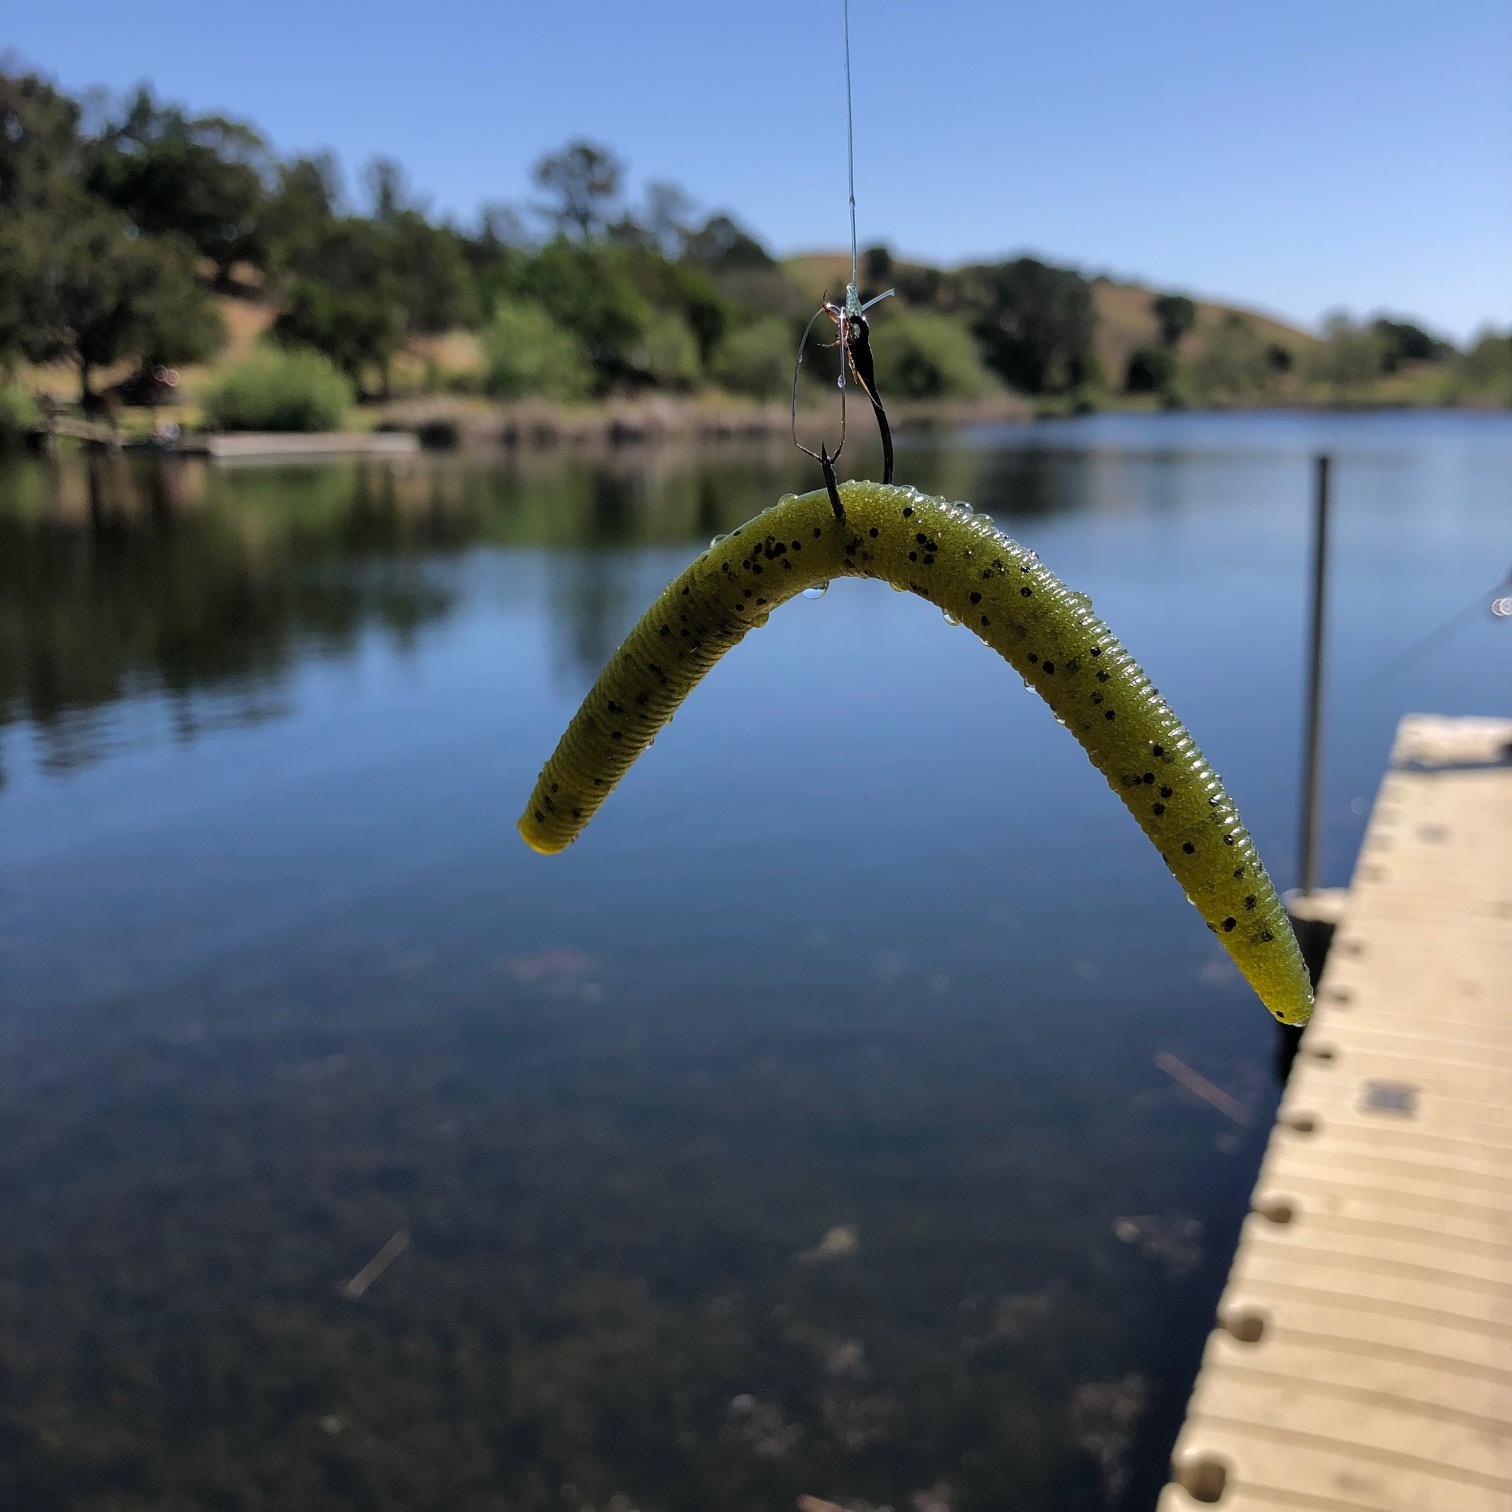 Wacky Rig Fishing: From Setup to Catch to Retrieval